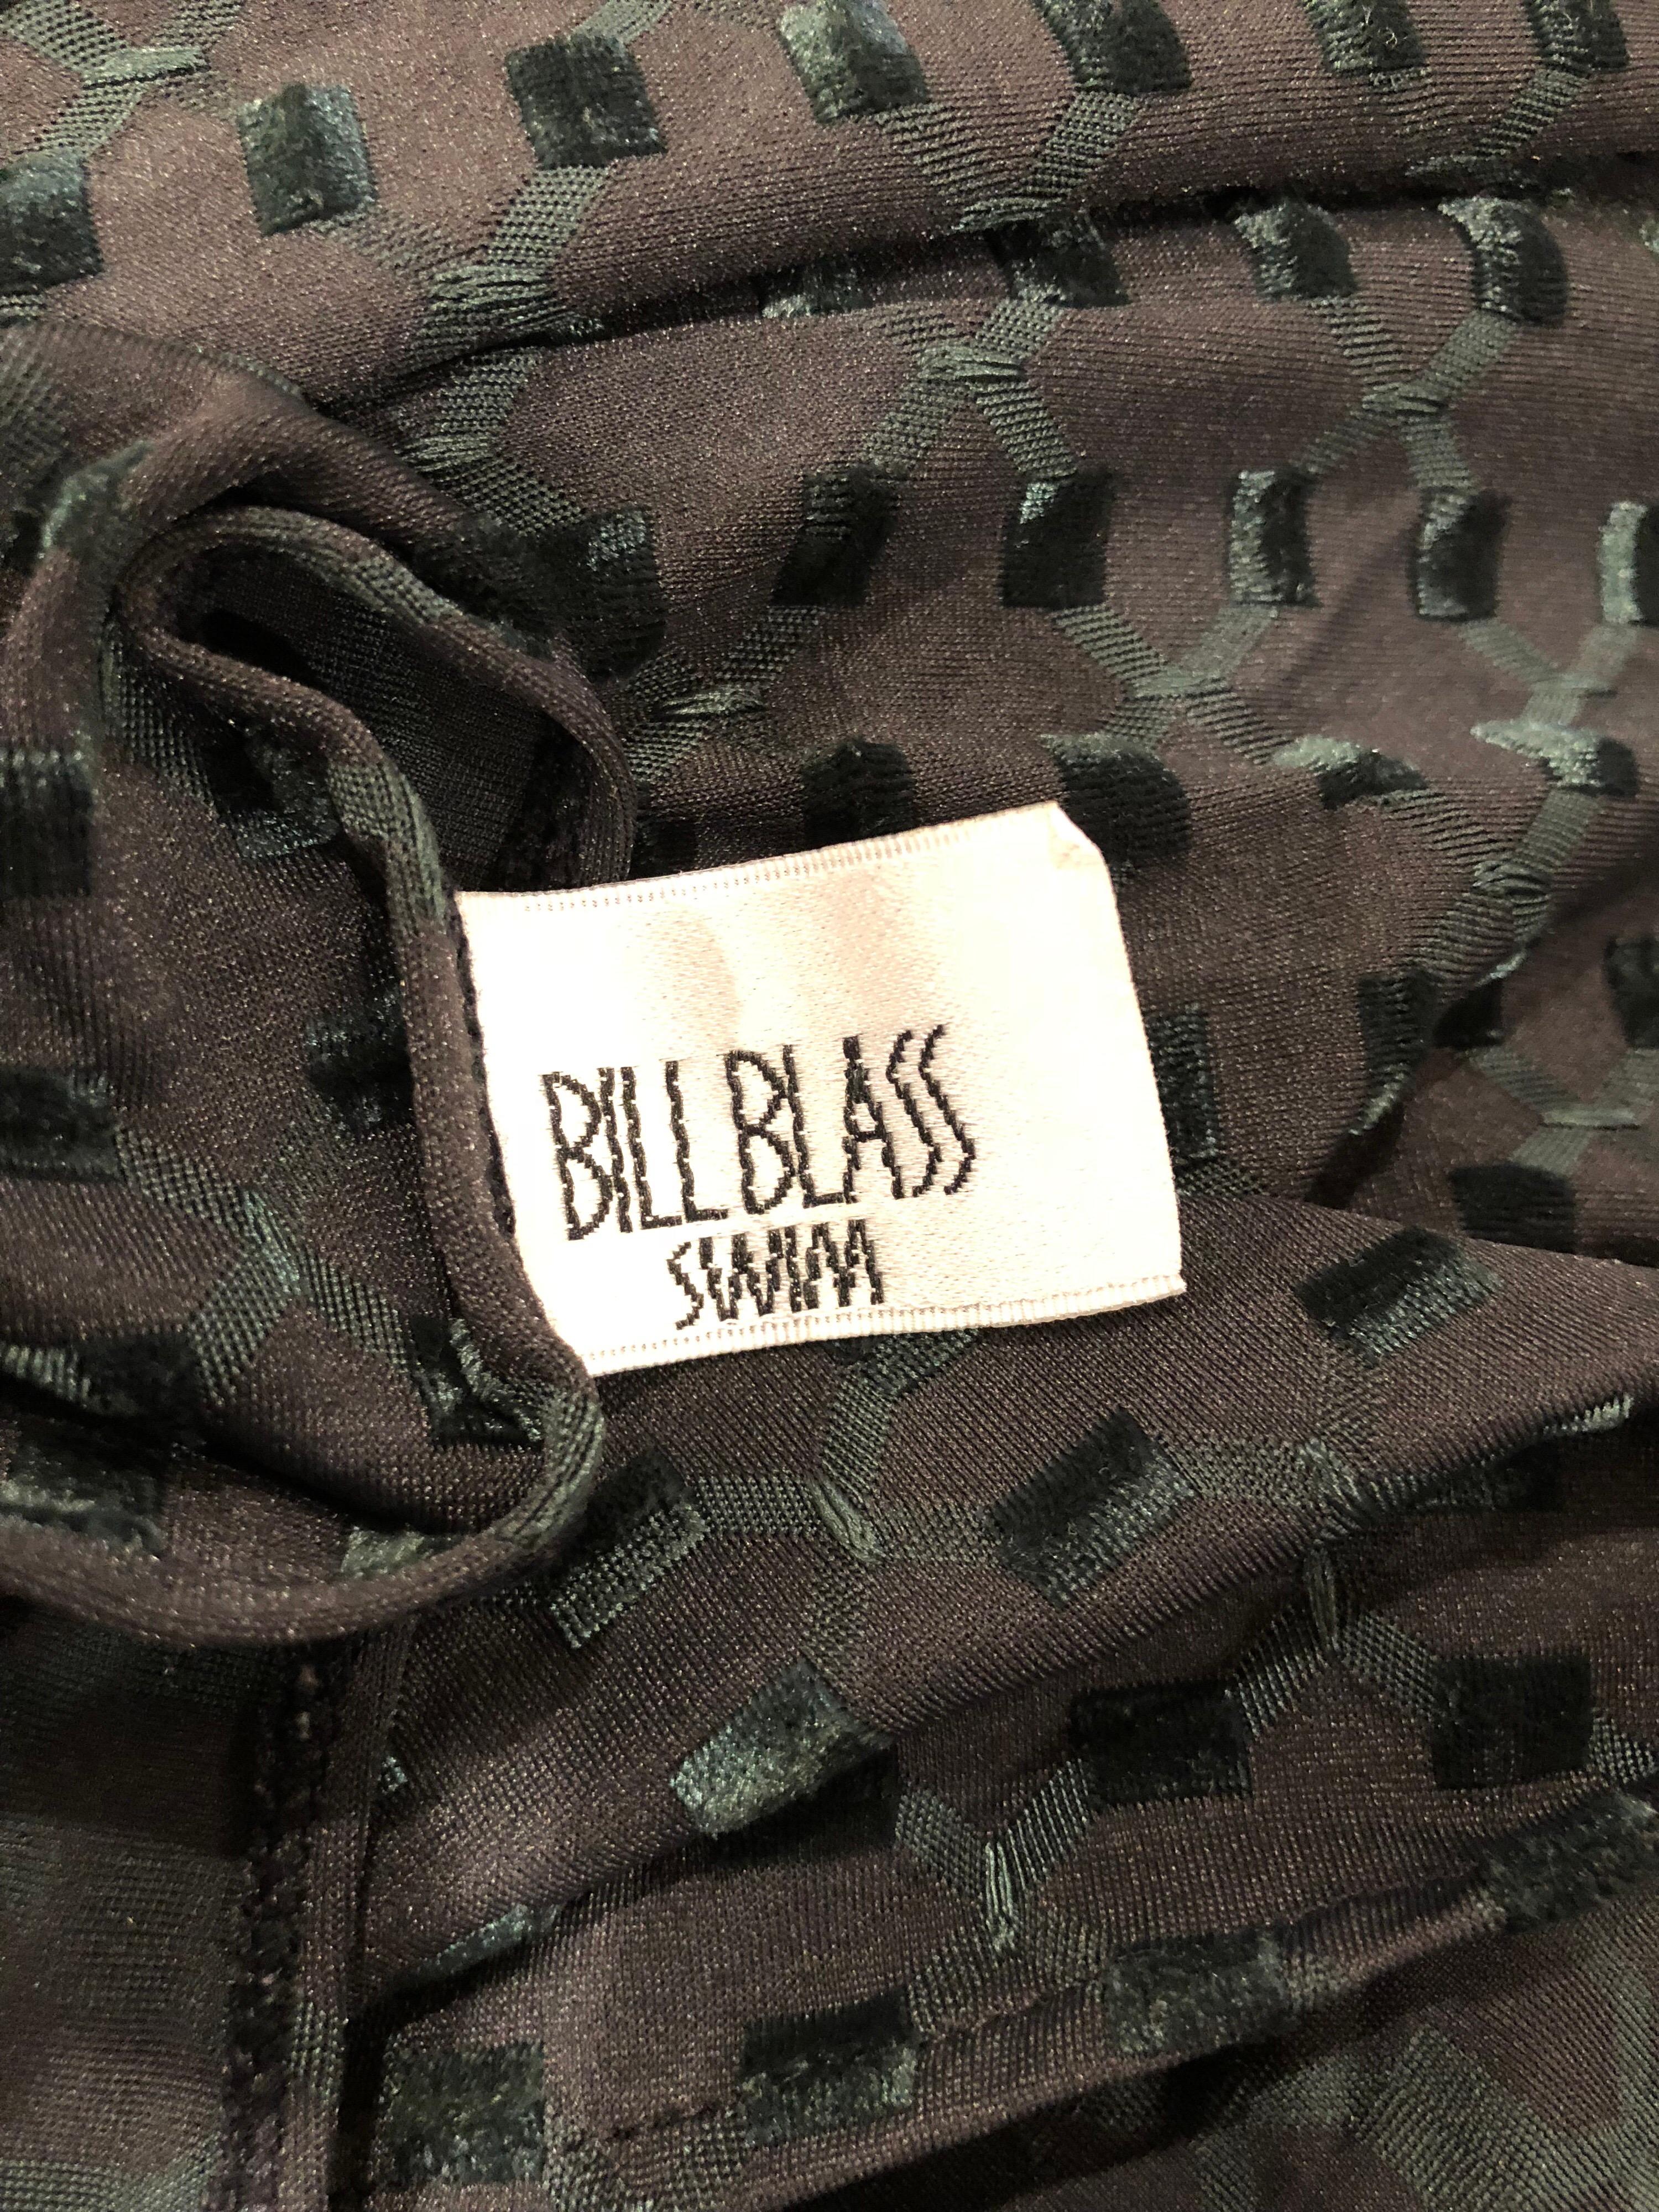 Vintage Bill Blass Swimsuit Sarong 1990s Black and Hunter Green 90s Wrap Skirt For Sale 7